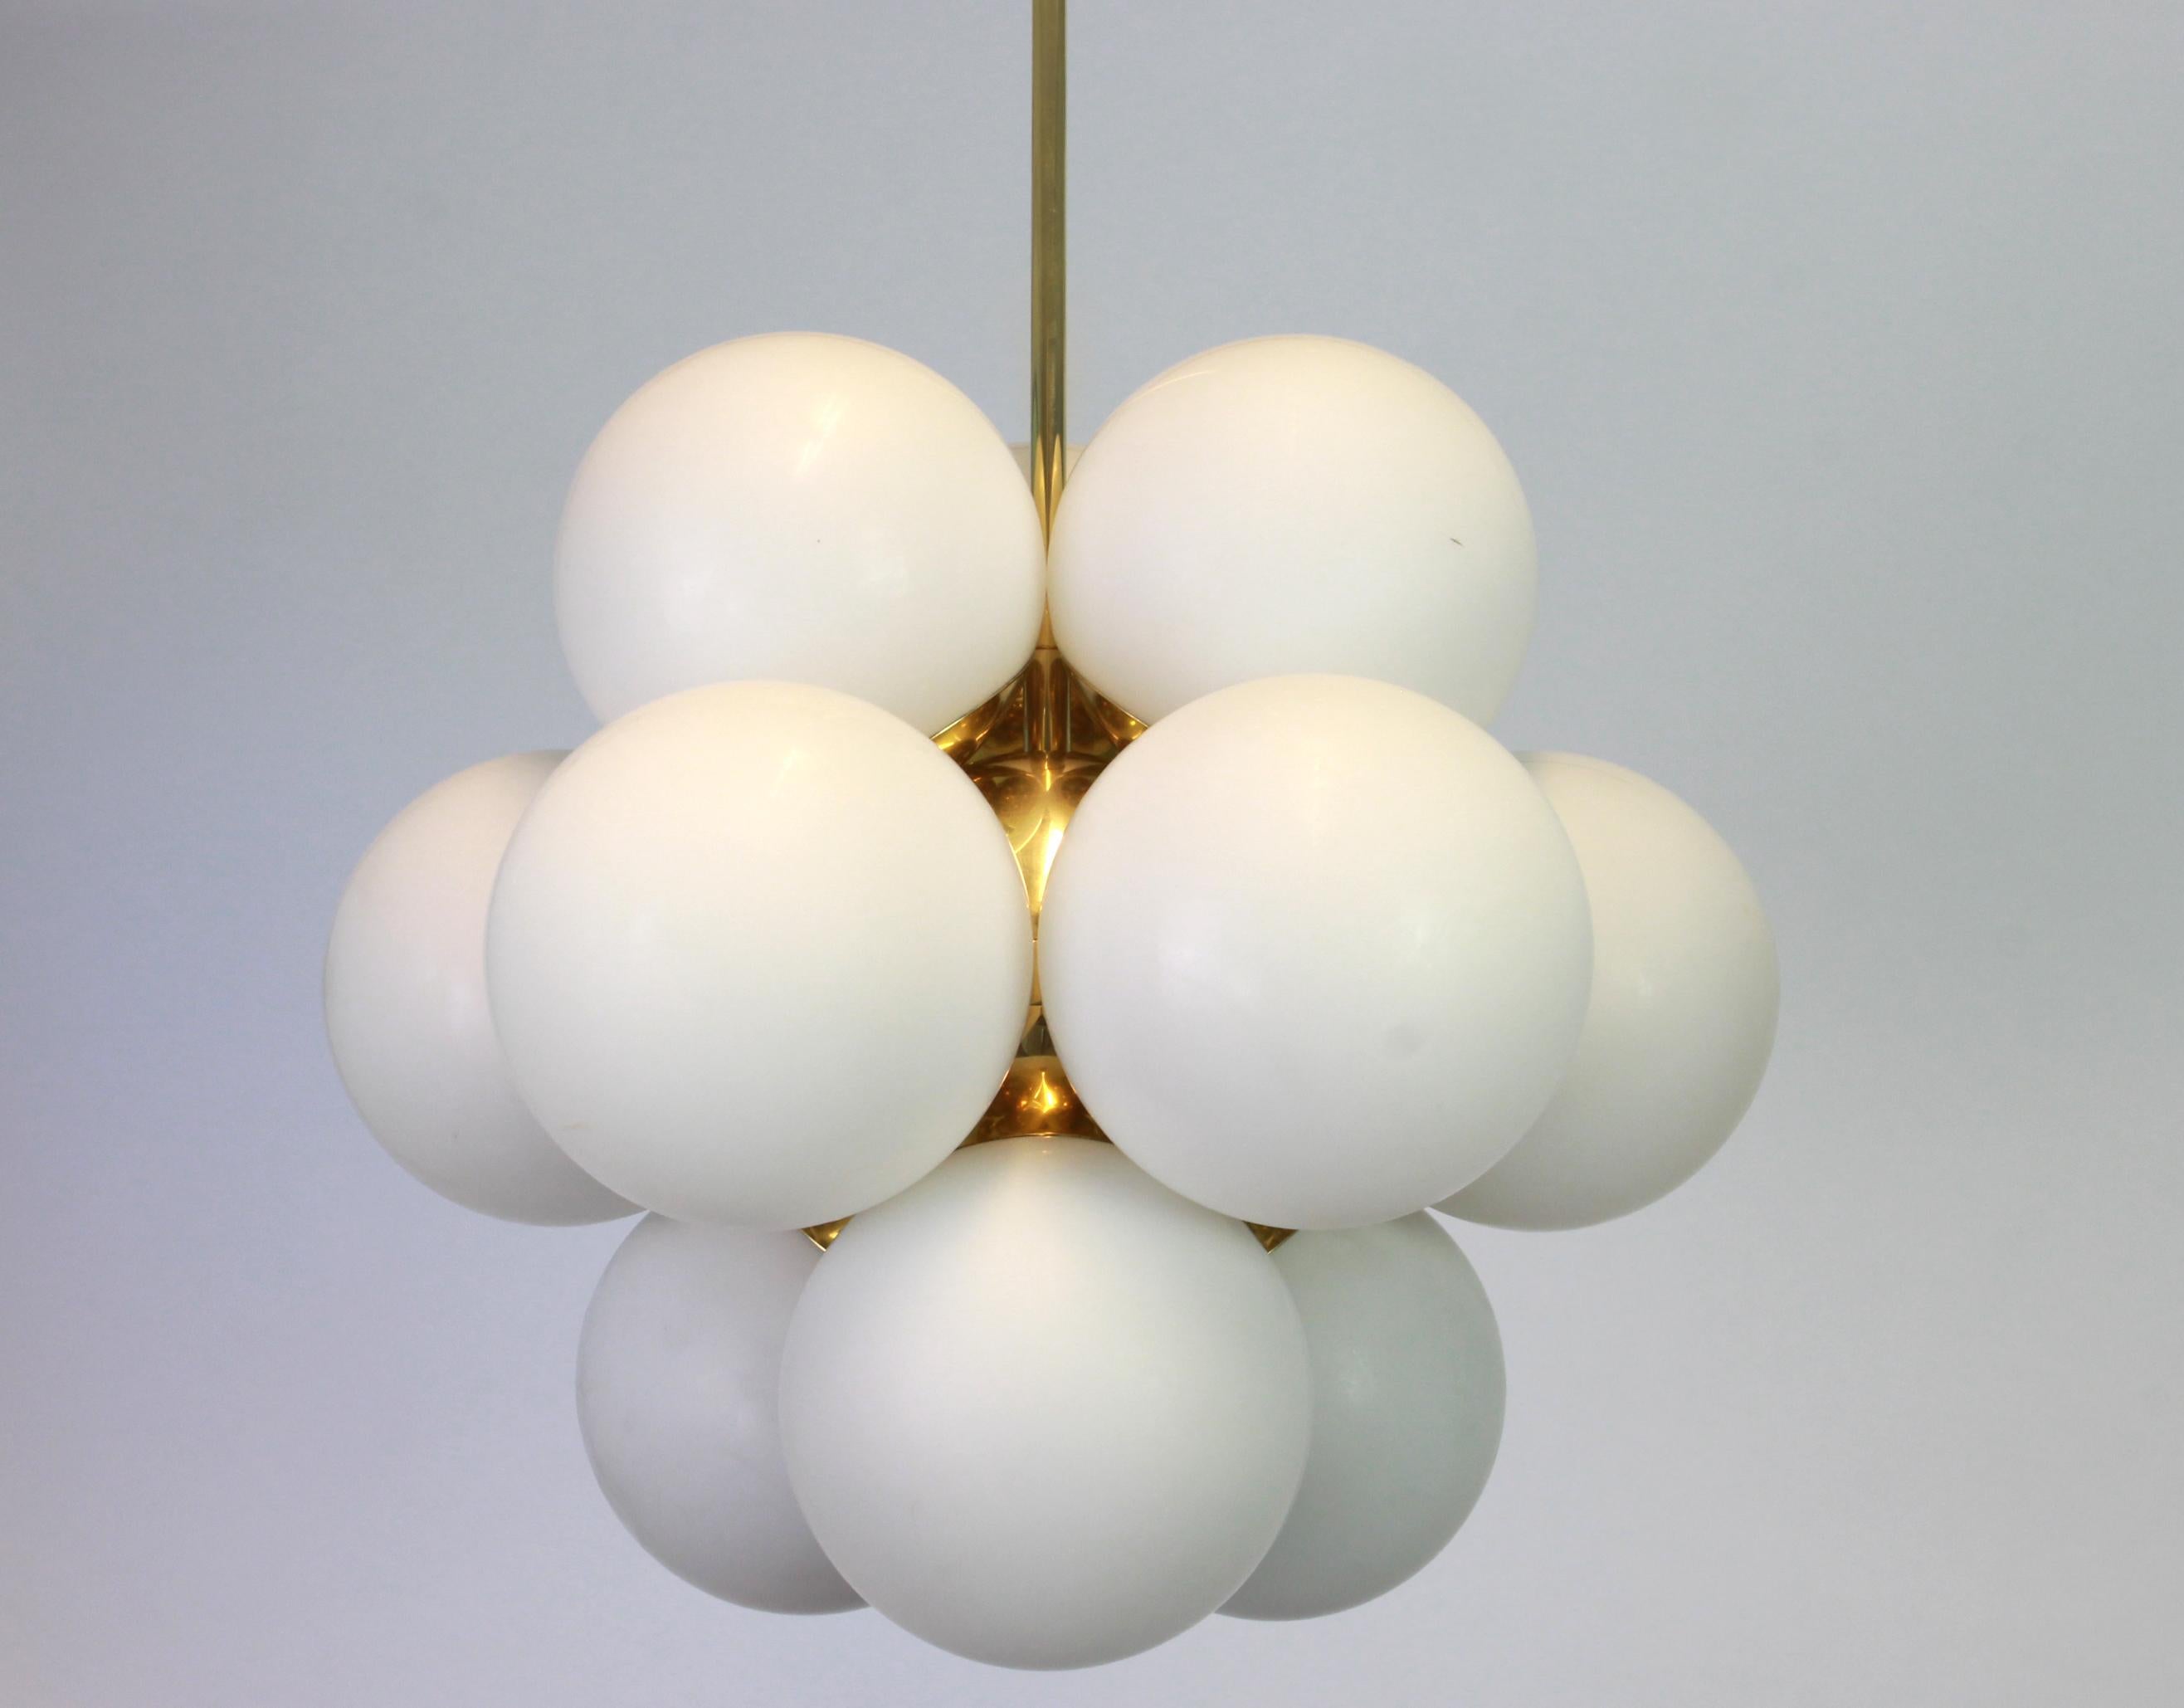 Wonderful Sputnik chandelier made by Kaiser Leuchten, Germany, circa 1970-1979.
Great Atomium shaped chandelier with 12 opal glasses.

High quality and in very good condition. Cleaned, well-wired and ready to use. 

The fixture requires 12 x